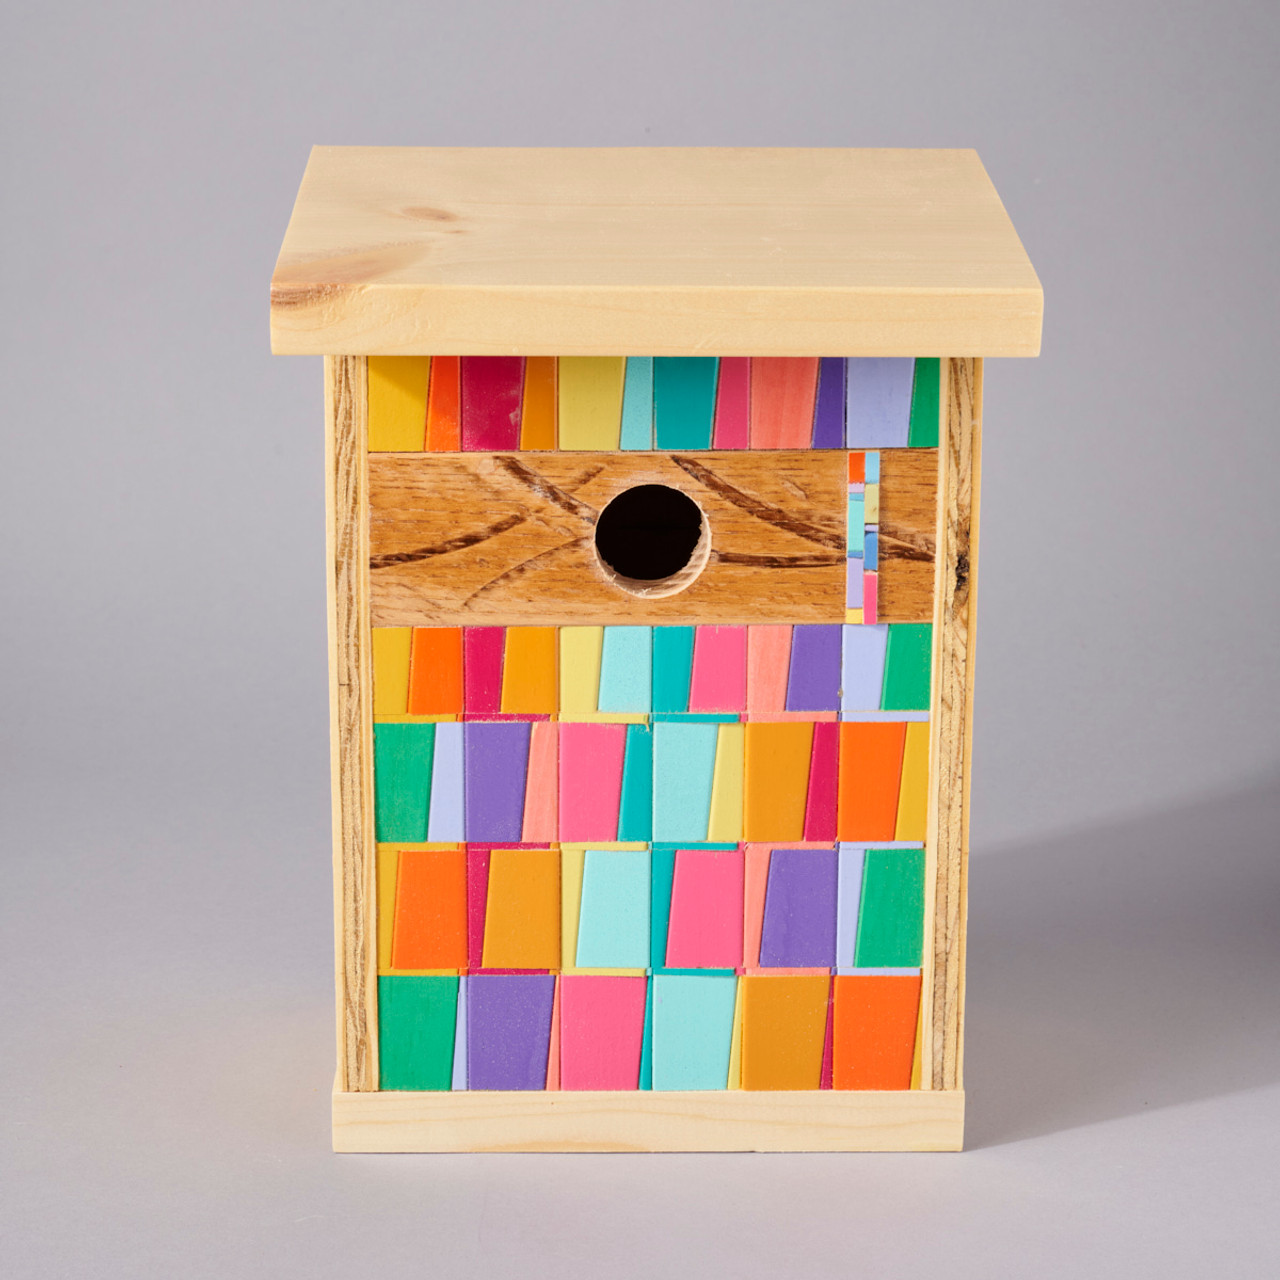 20 Handmade Gifts Under $10 for Kids - The Yellow Birdhouse